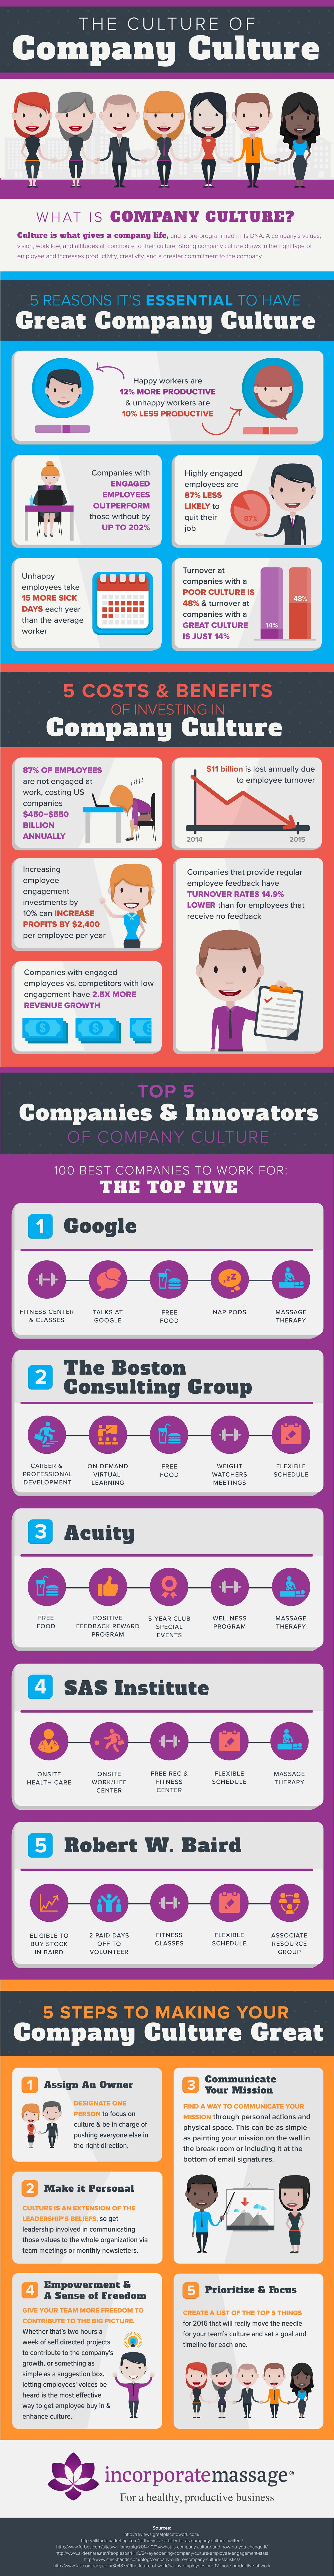 The Culture of Company Culture